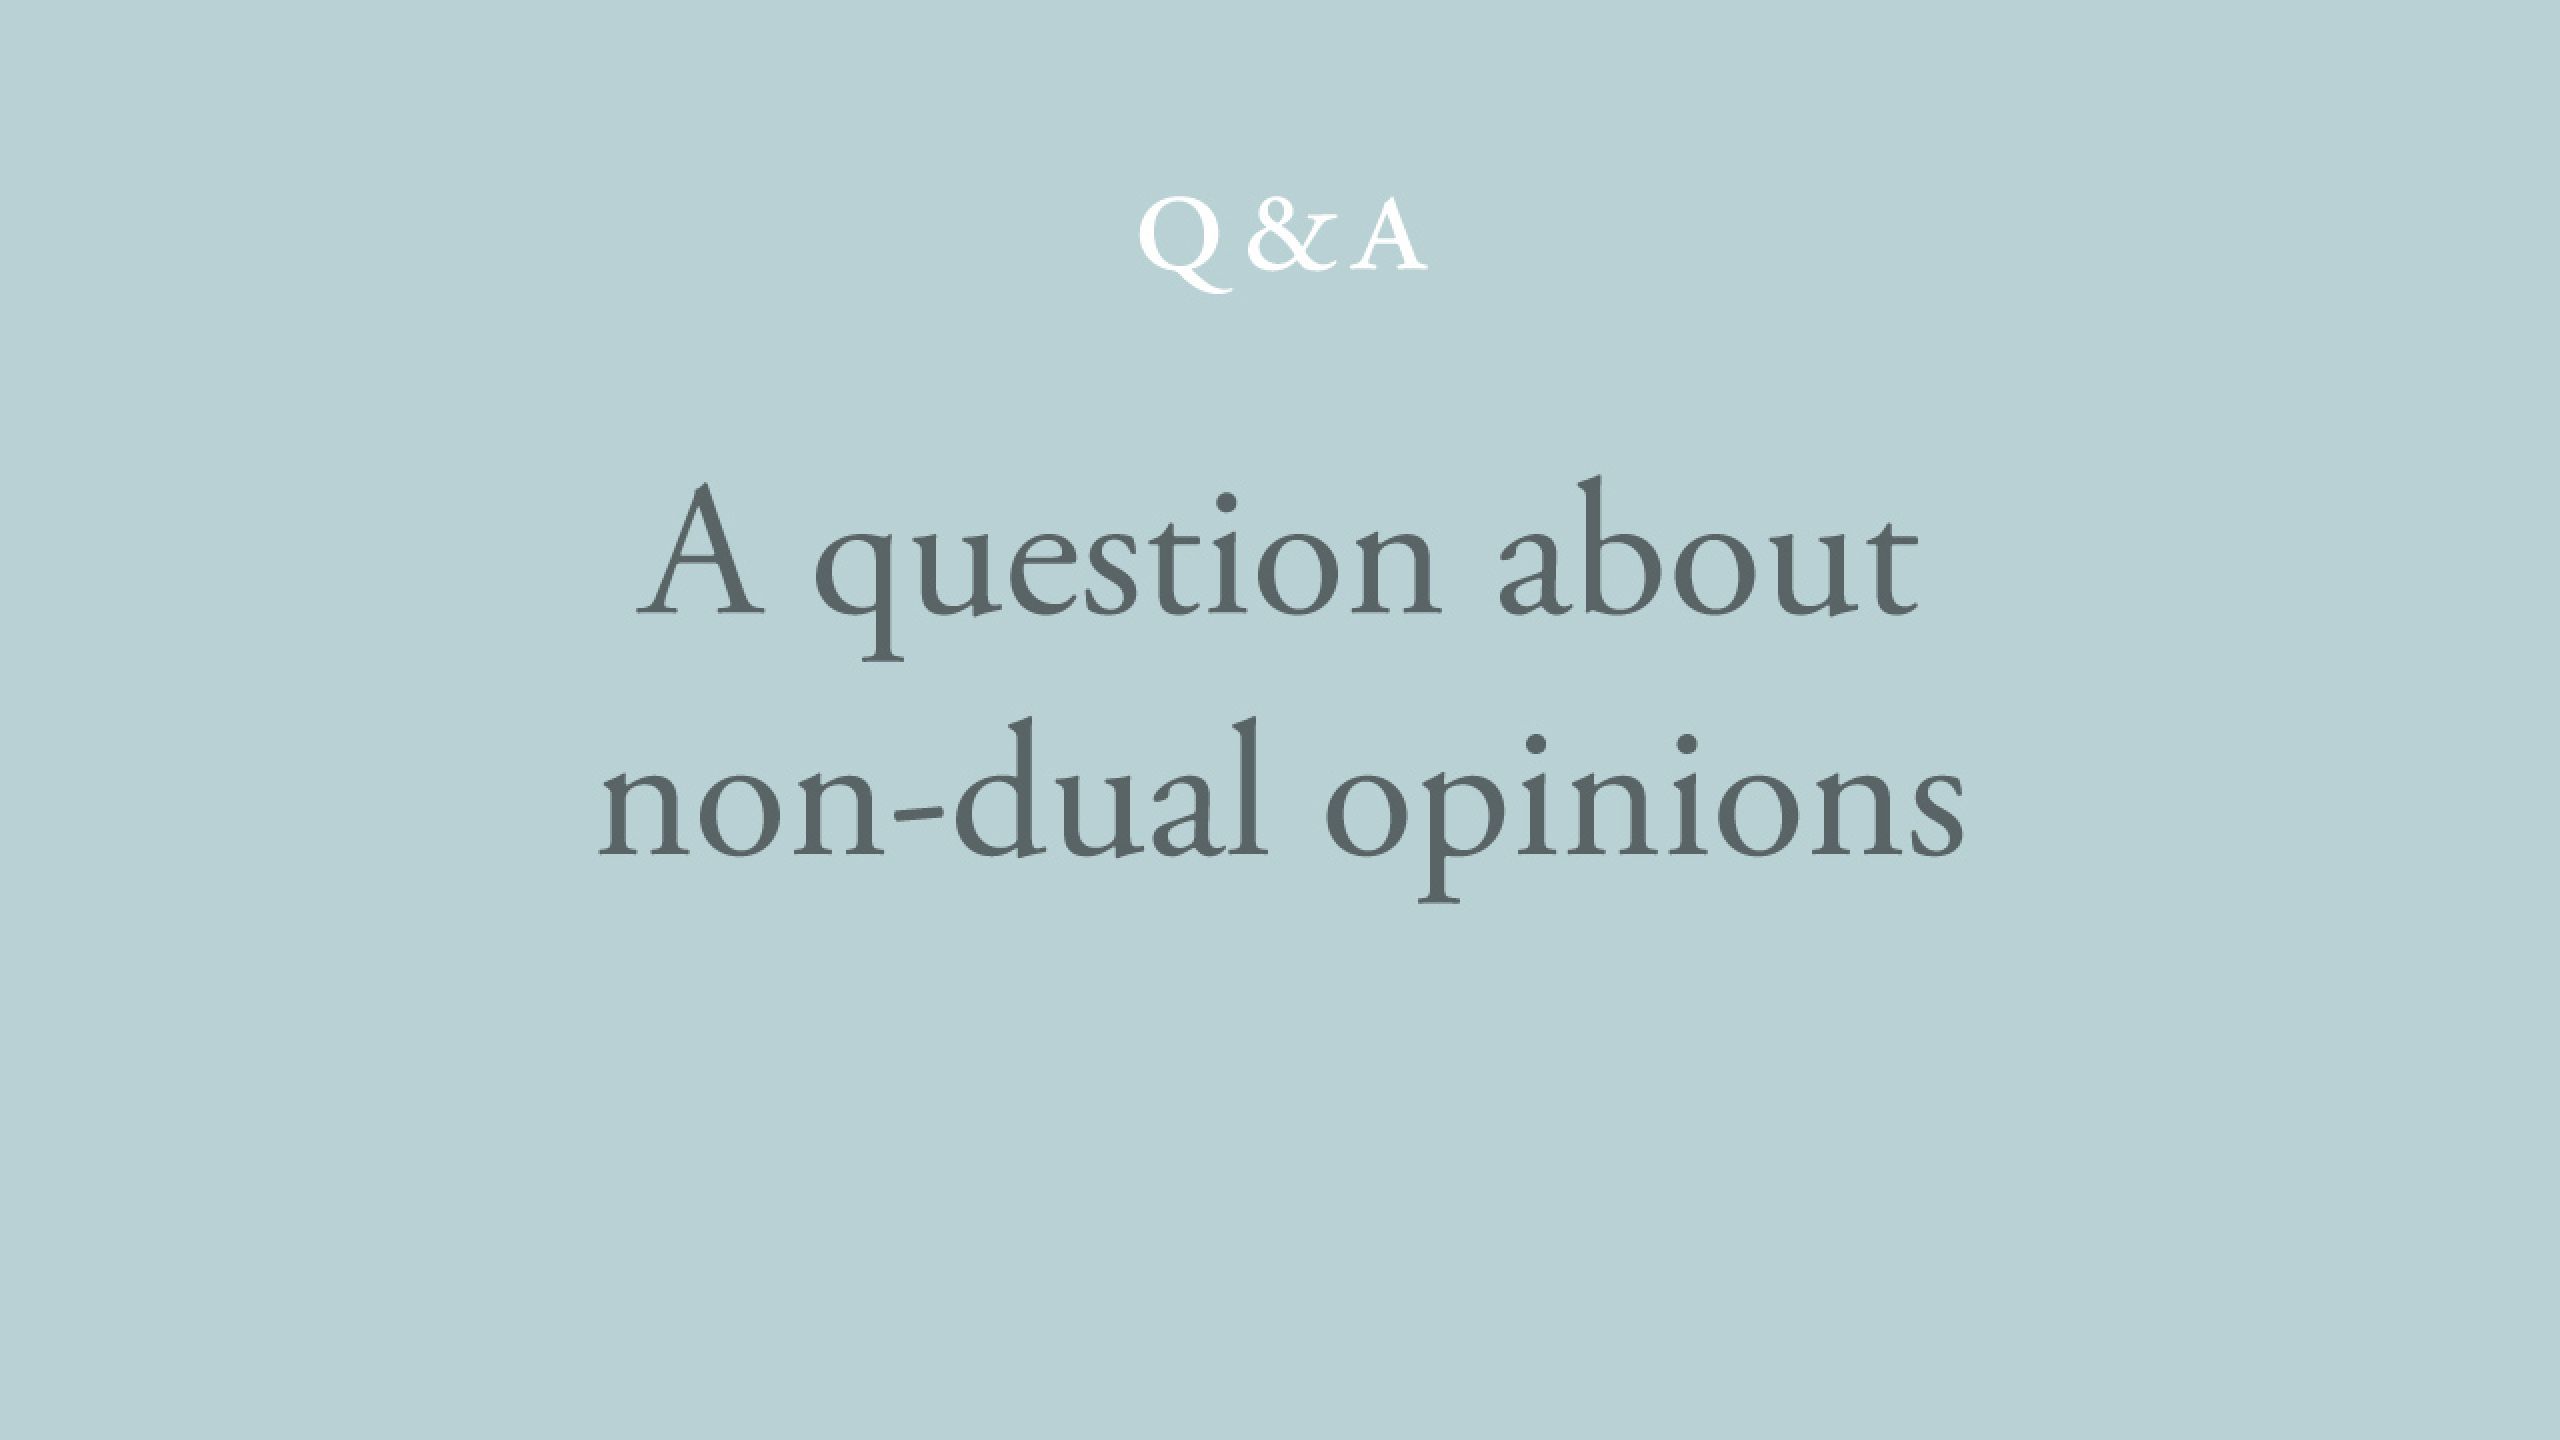 How can I go beyond the battlefield of opinions about the non-dual teaching?